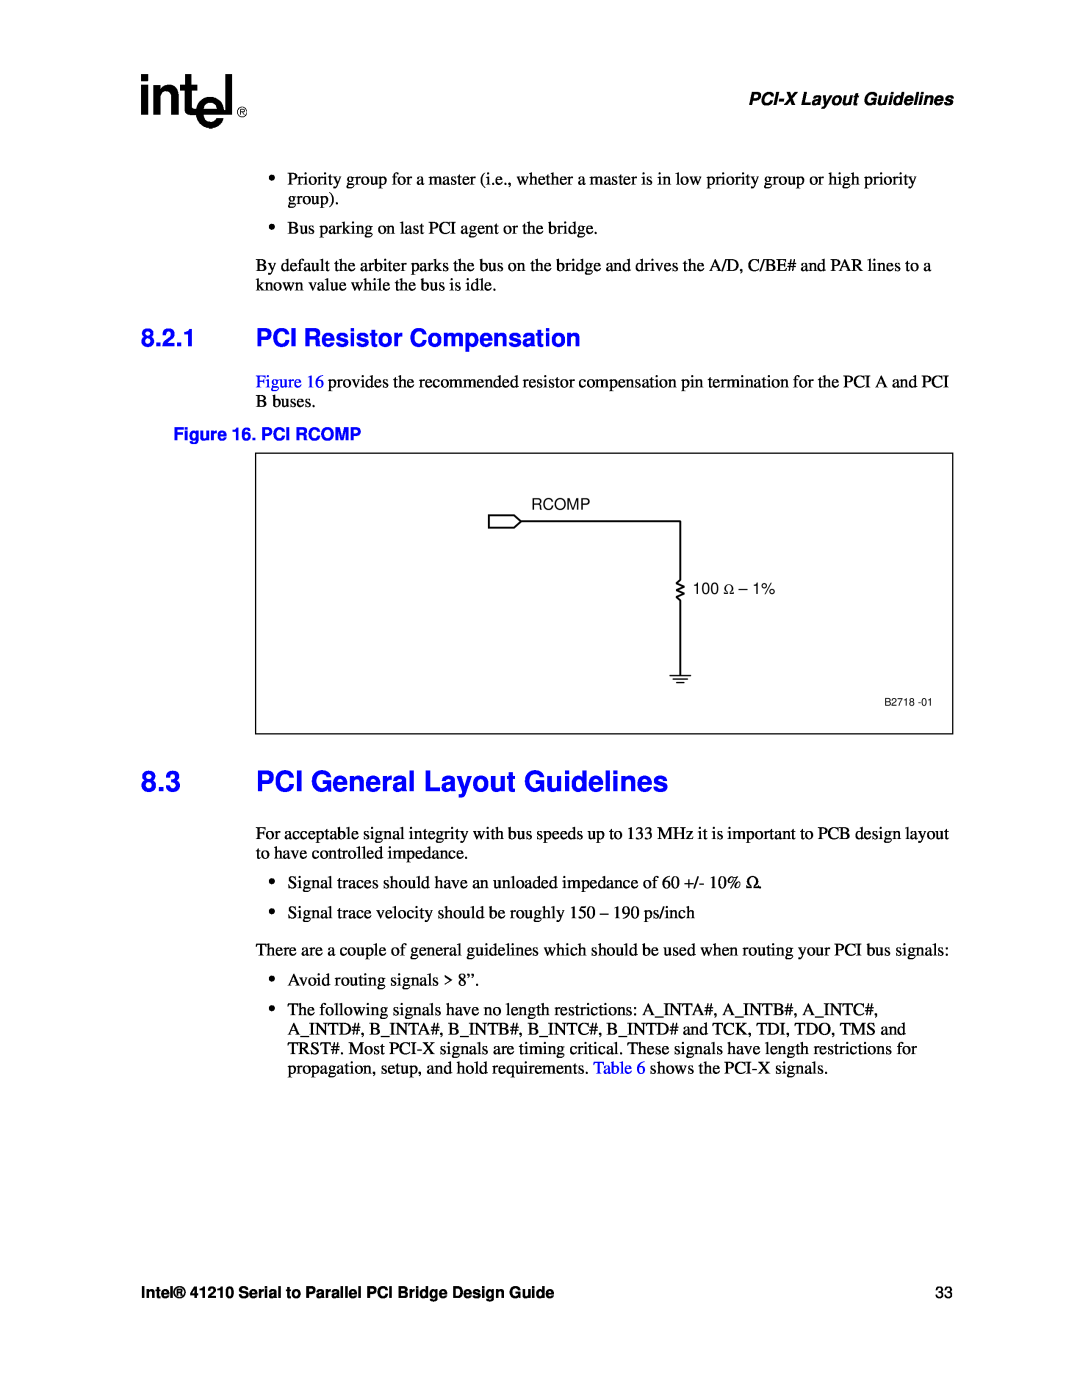 Intel 41210 manual PCI General Layout Guidelines, PCI Resistor Compensation, Pci Rcomp, PCI-X Layout Guidelines 